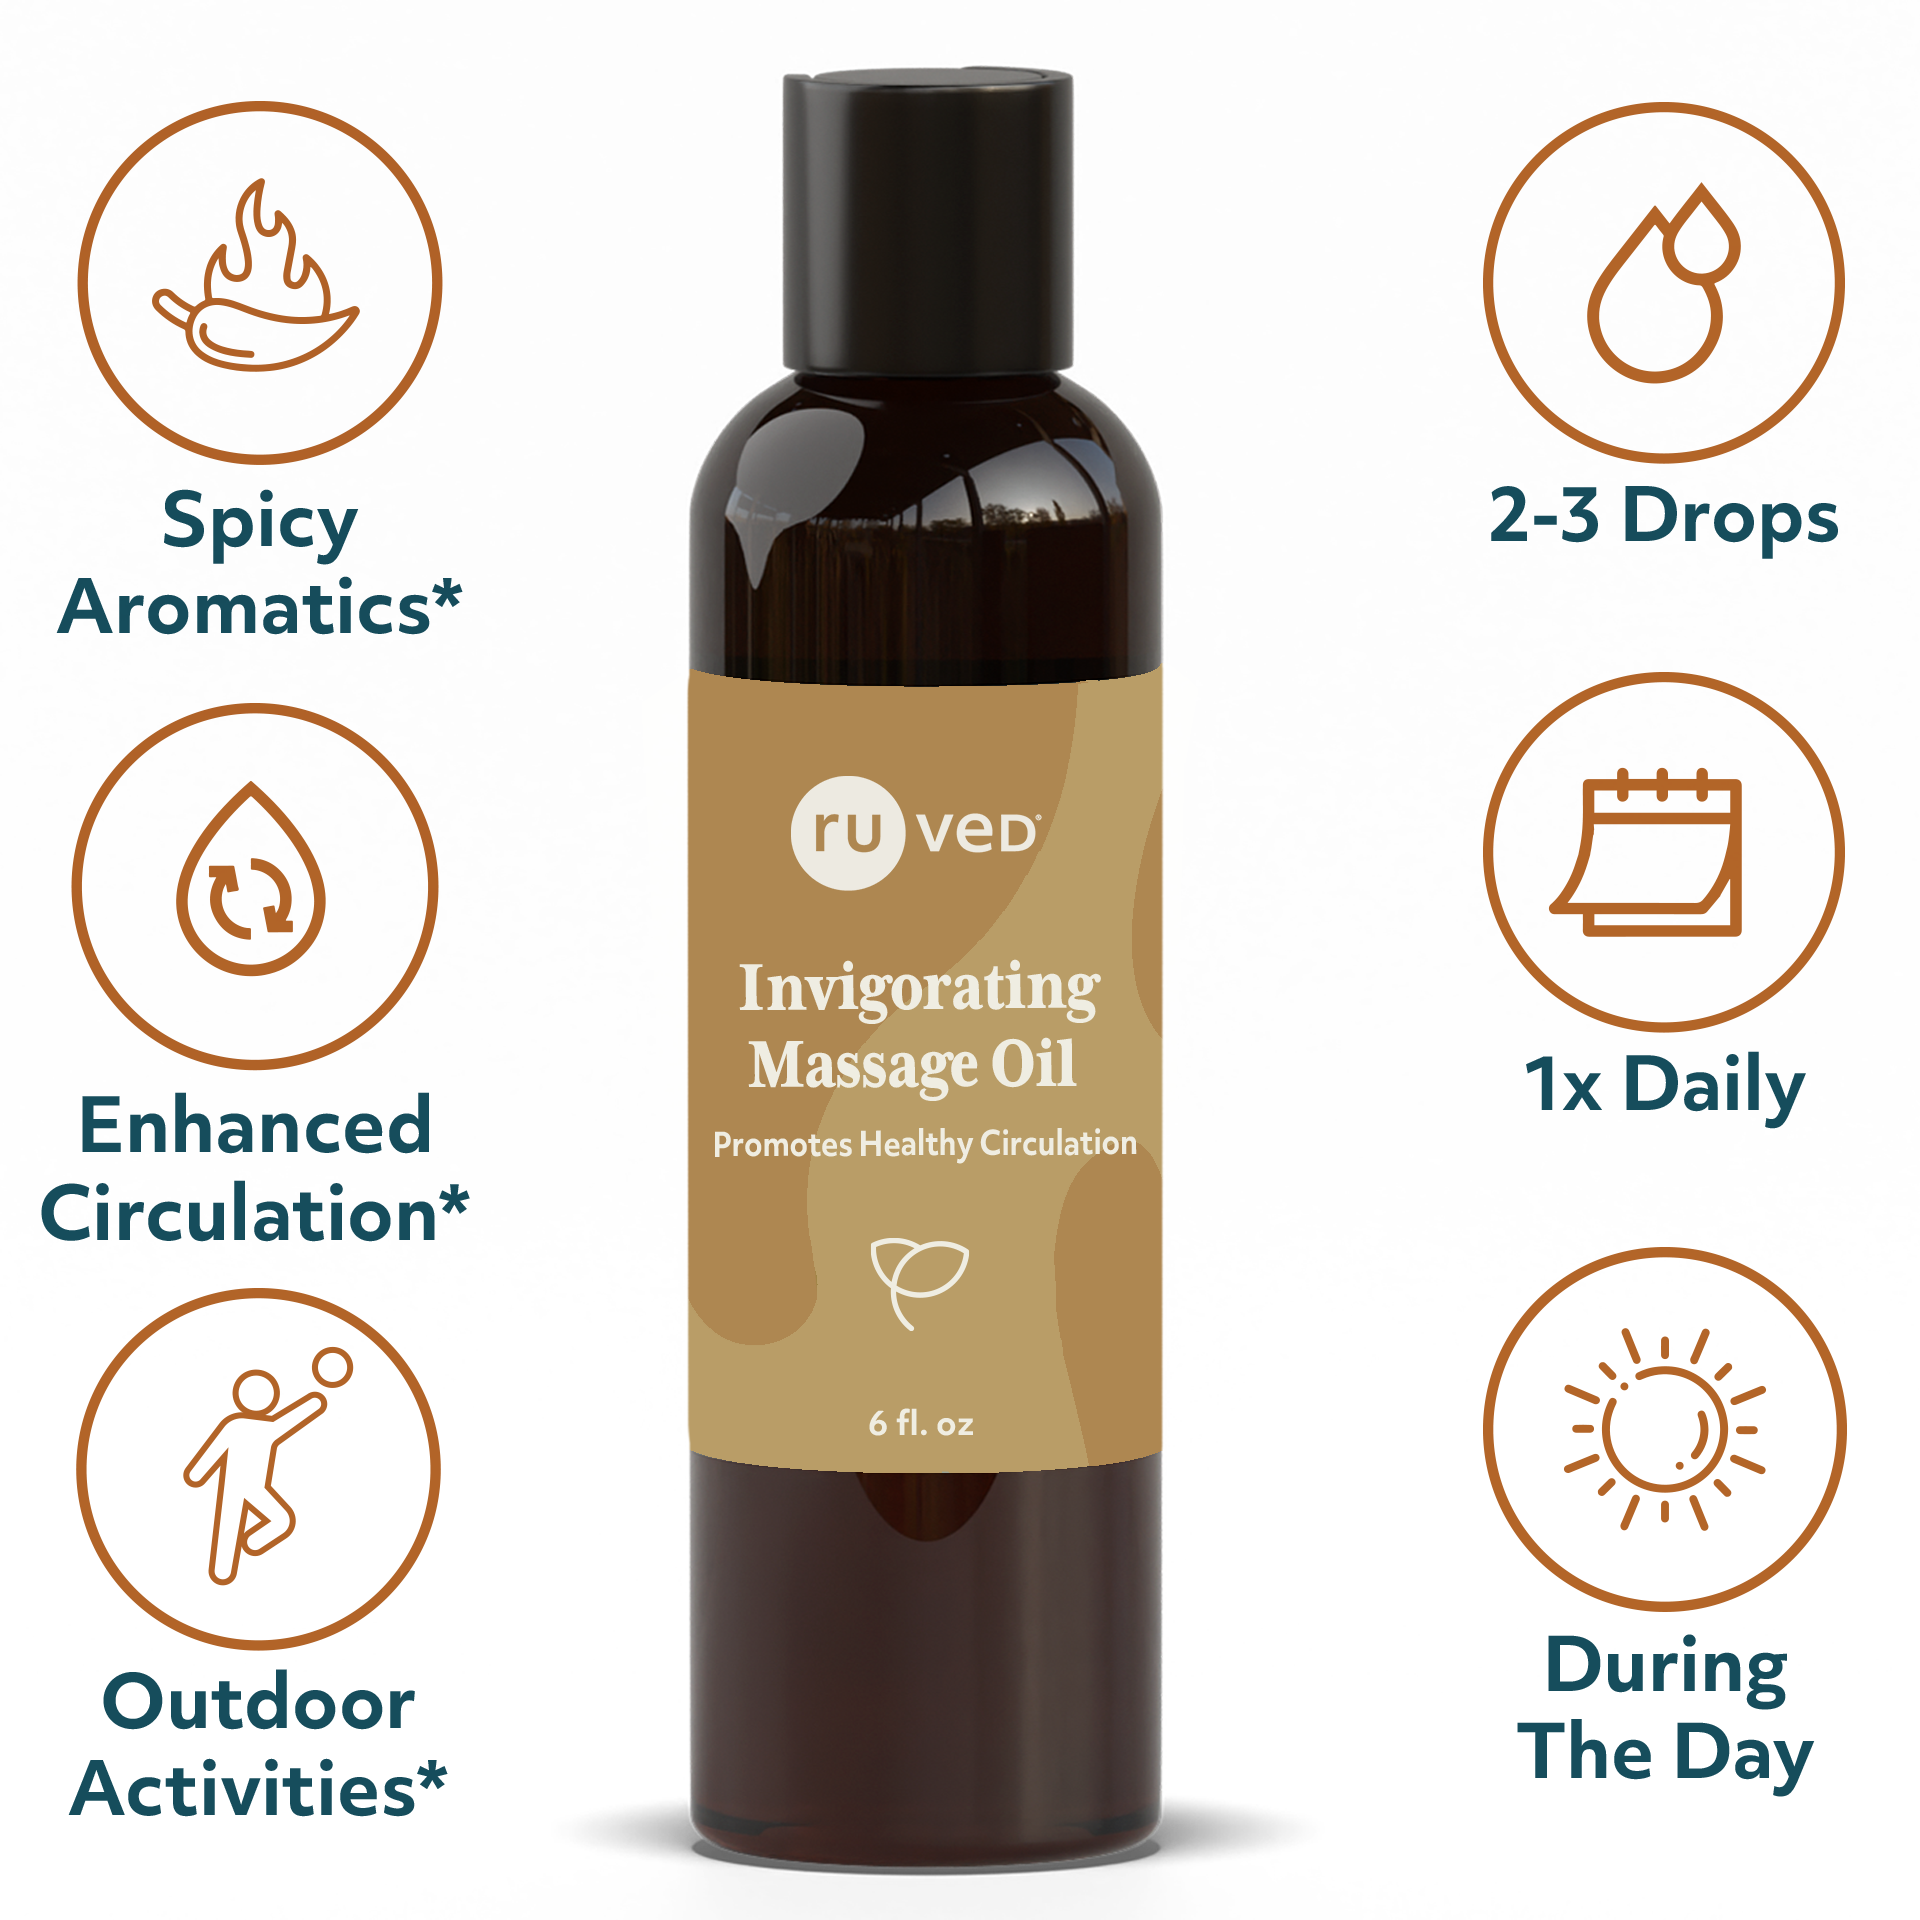 Invigorating Massage Oil Infographics - Luxurious blend of natural oils to Enhance Circulation on the skin, promoting spicy aromatics for a cold appearance. 100ml Bottle.